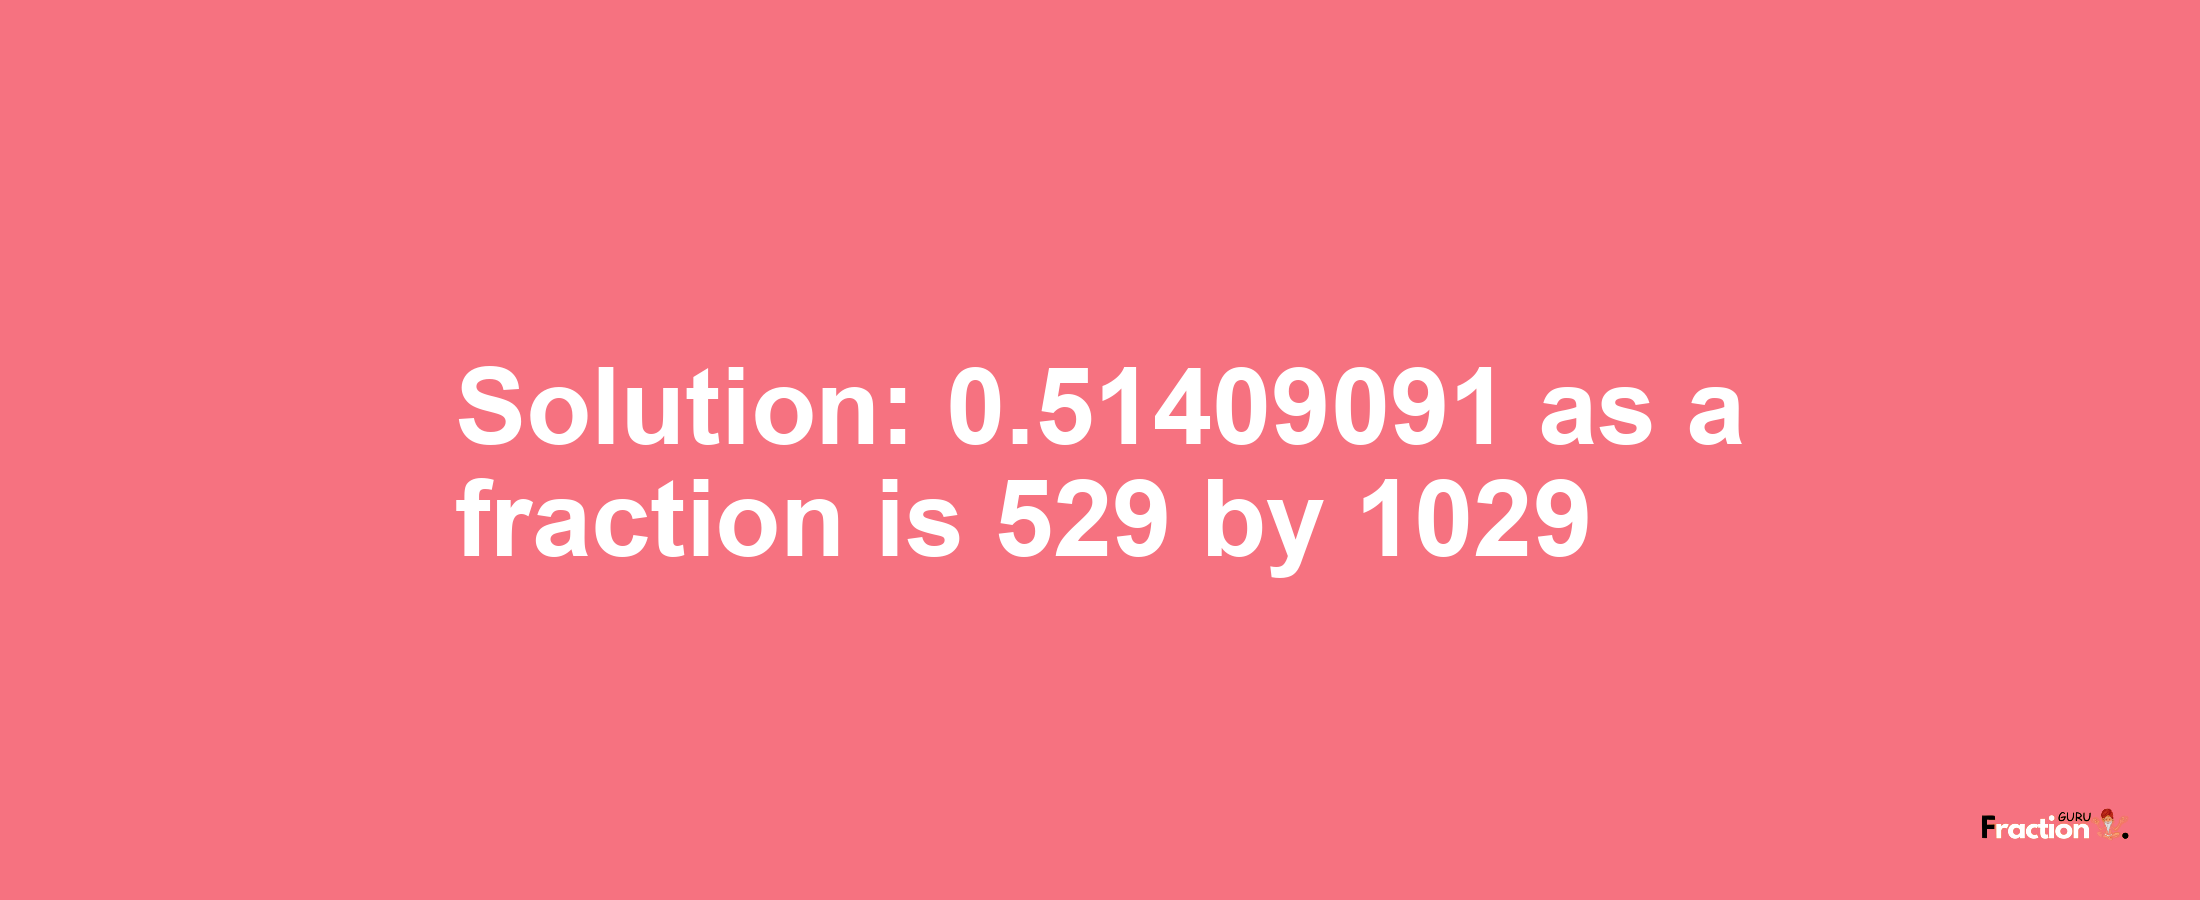 Solution:0.51409091 as a fraction is 529/1029